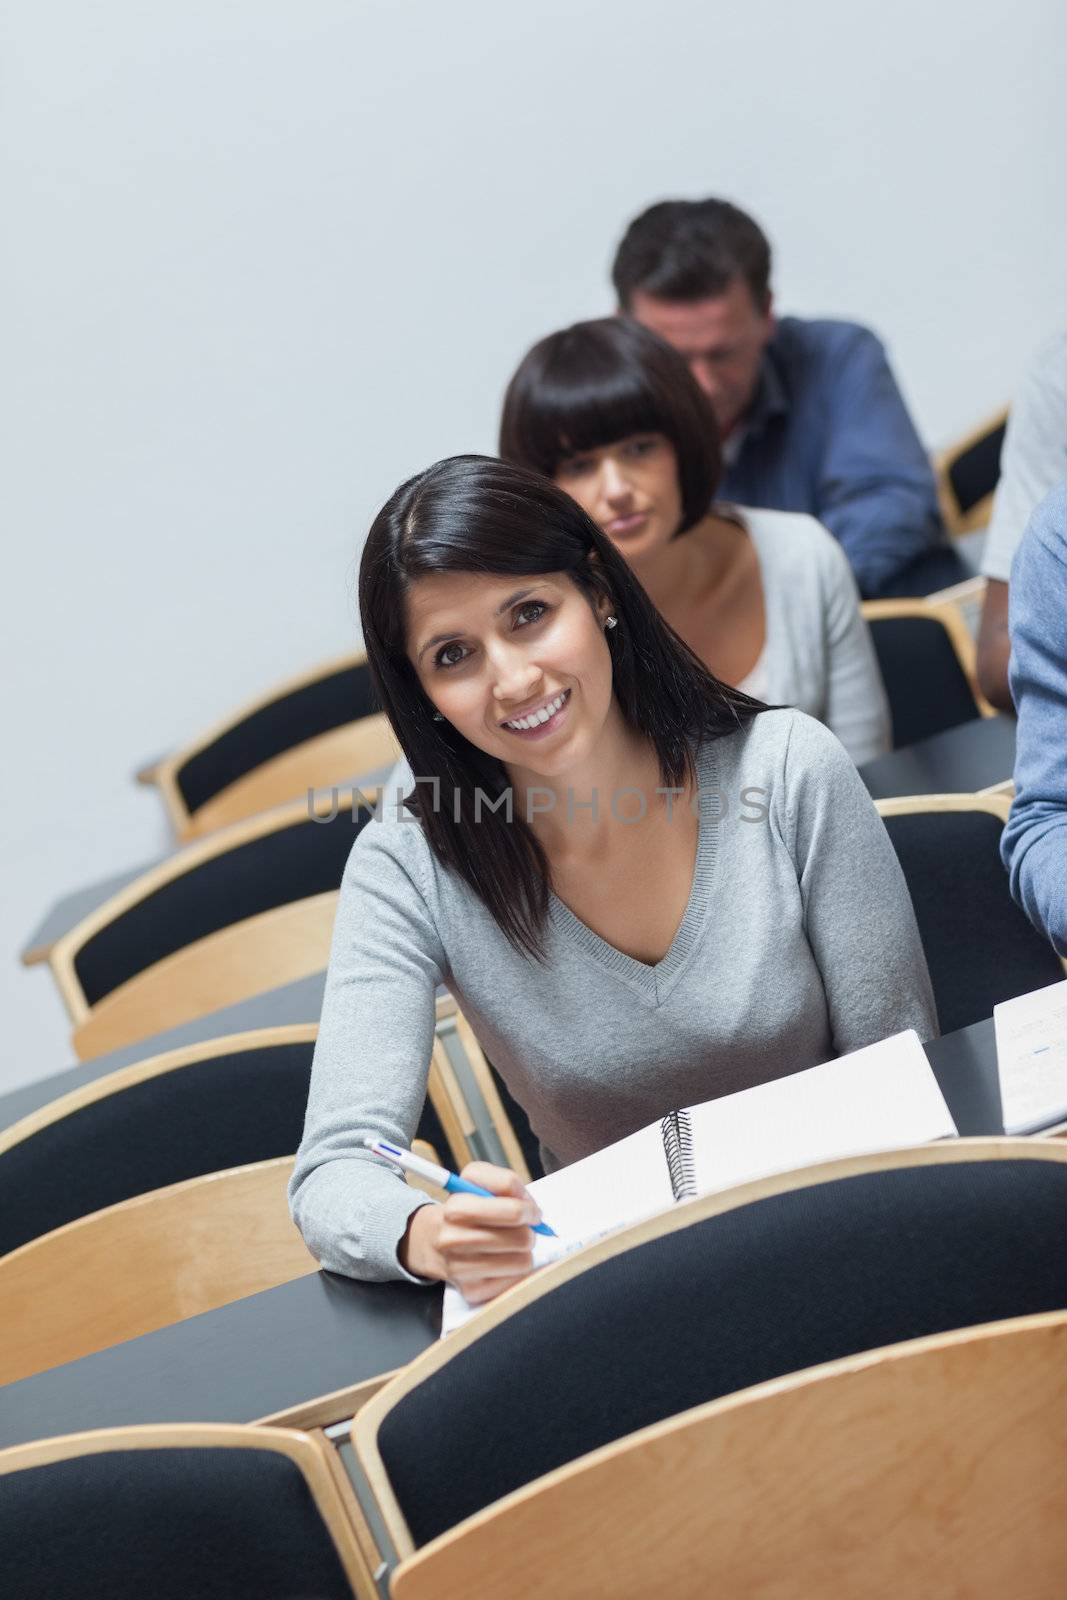 Smiling woman looking up from note taking by Wavebreakmedia